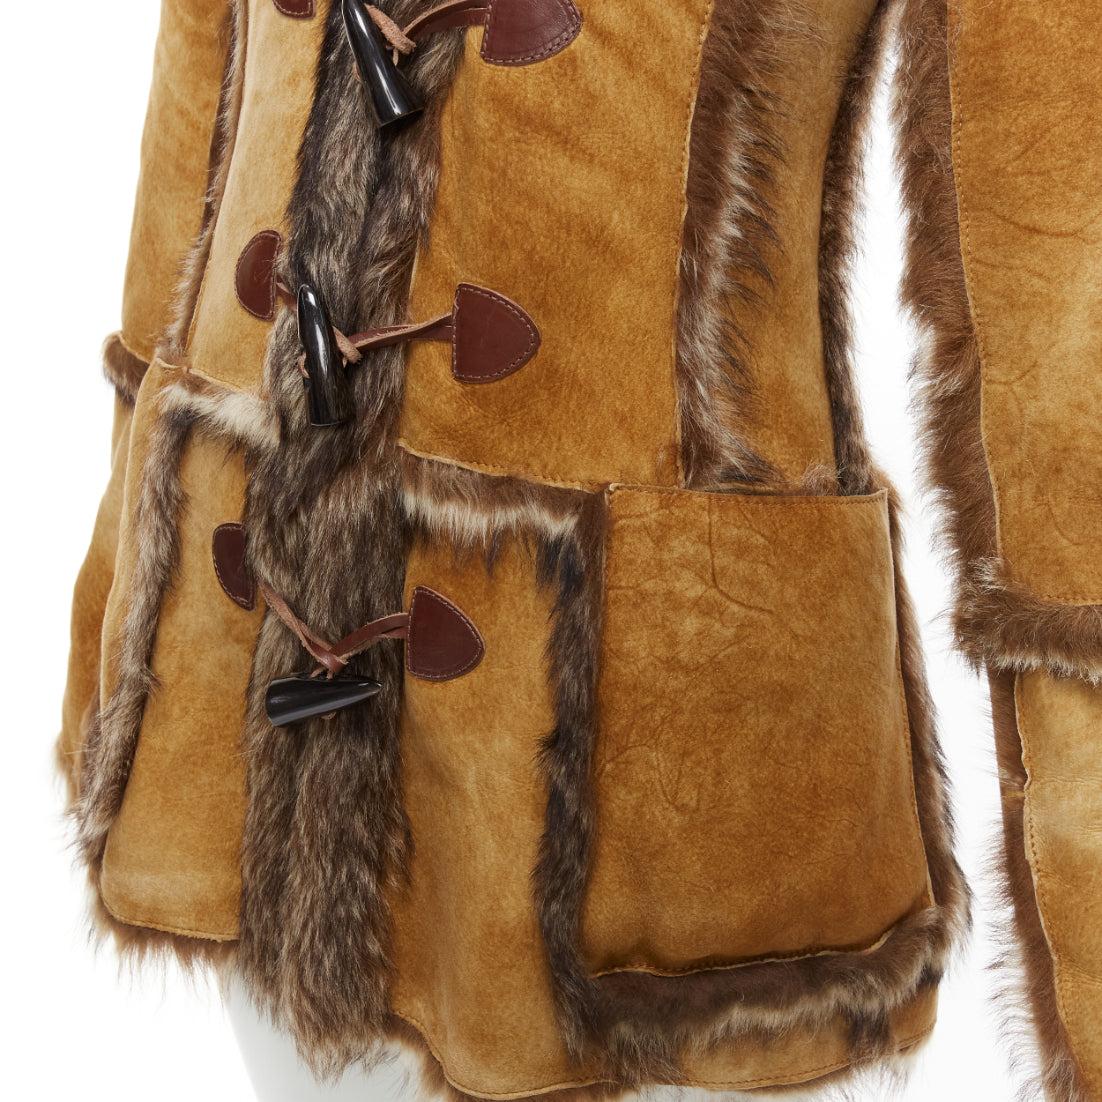 DOLCE GABBANA Vintage tan fur genuine sheepskin fur hooded toggle coat IT38 XS
Reference: NILI/A00011
Brand: Dolce Gabbana
Designer: Domenico Dolce and Stefano Gabbana
Material: Leather, Fur
Color: Brown
Pattern: Solid
Closure: Button
Lining: Brown